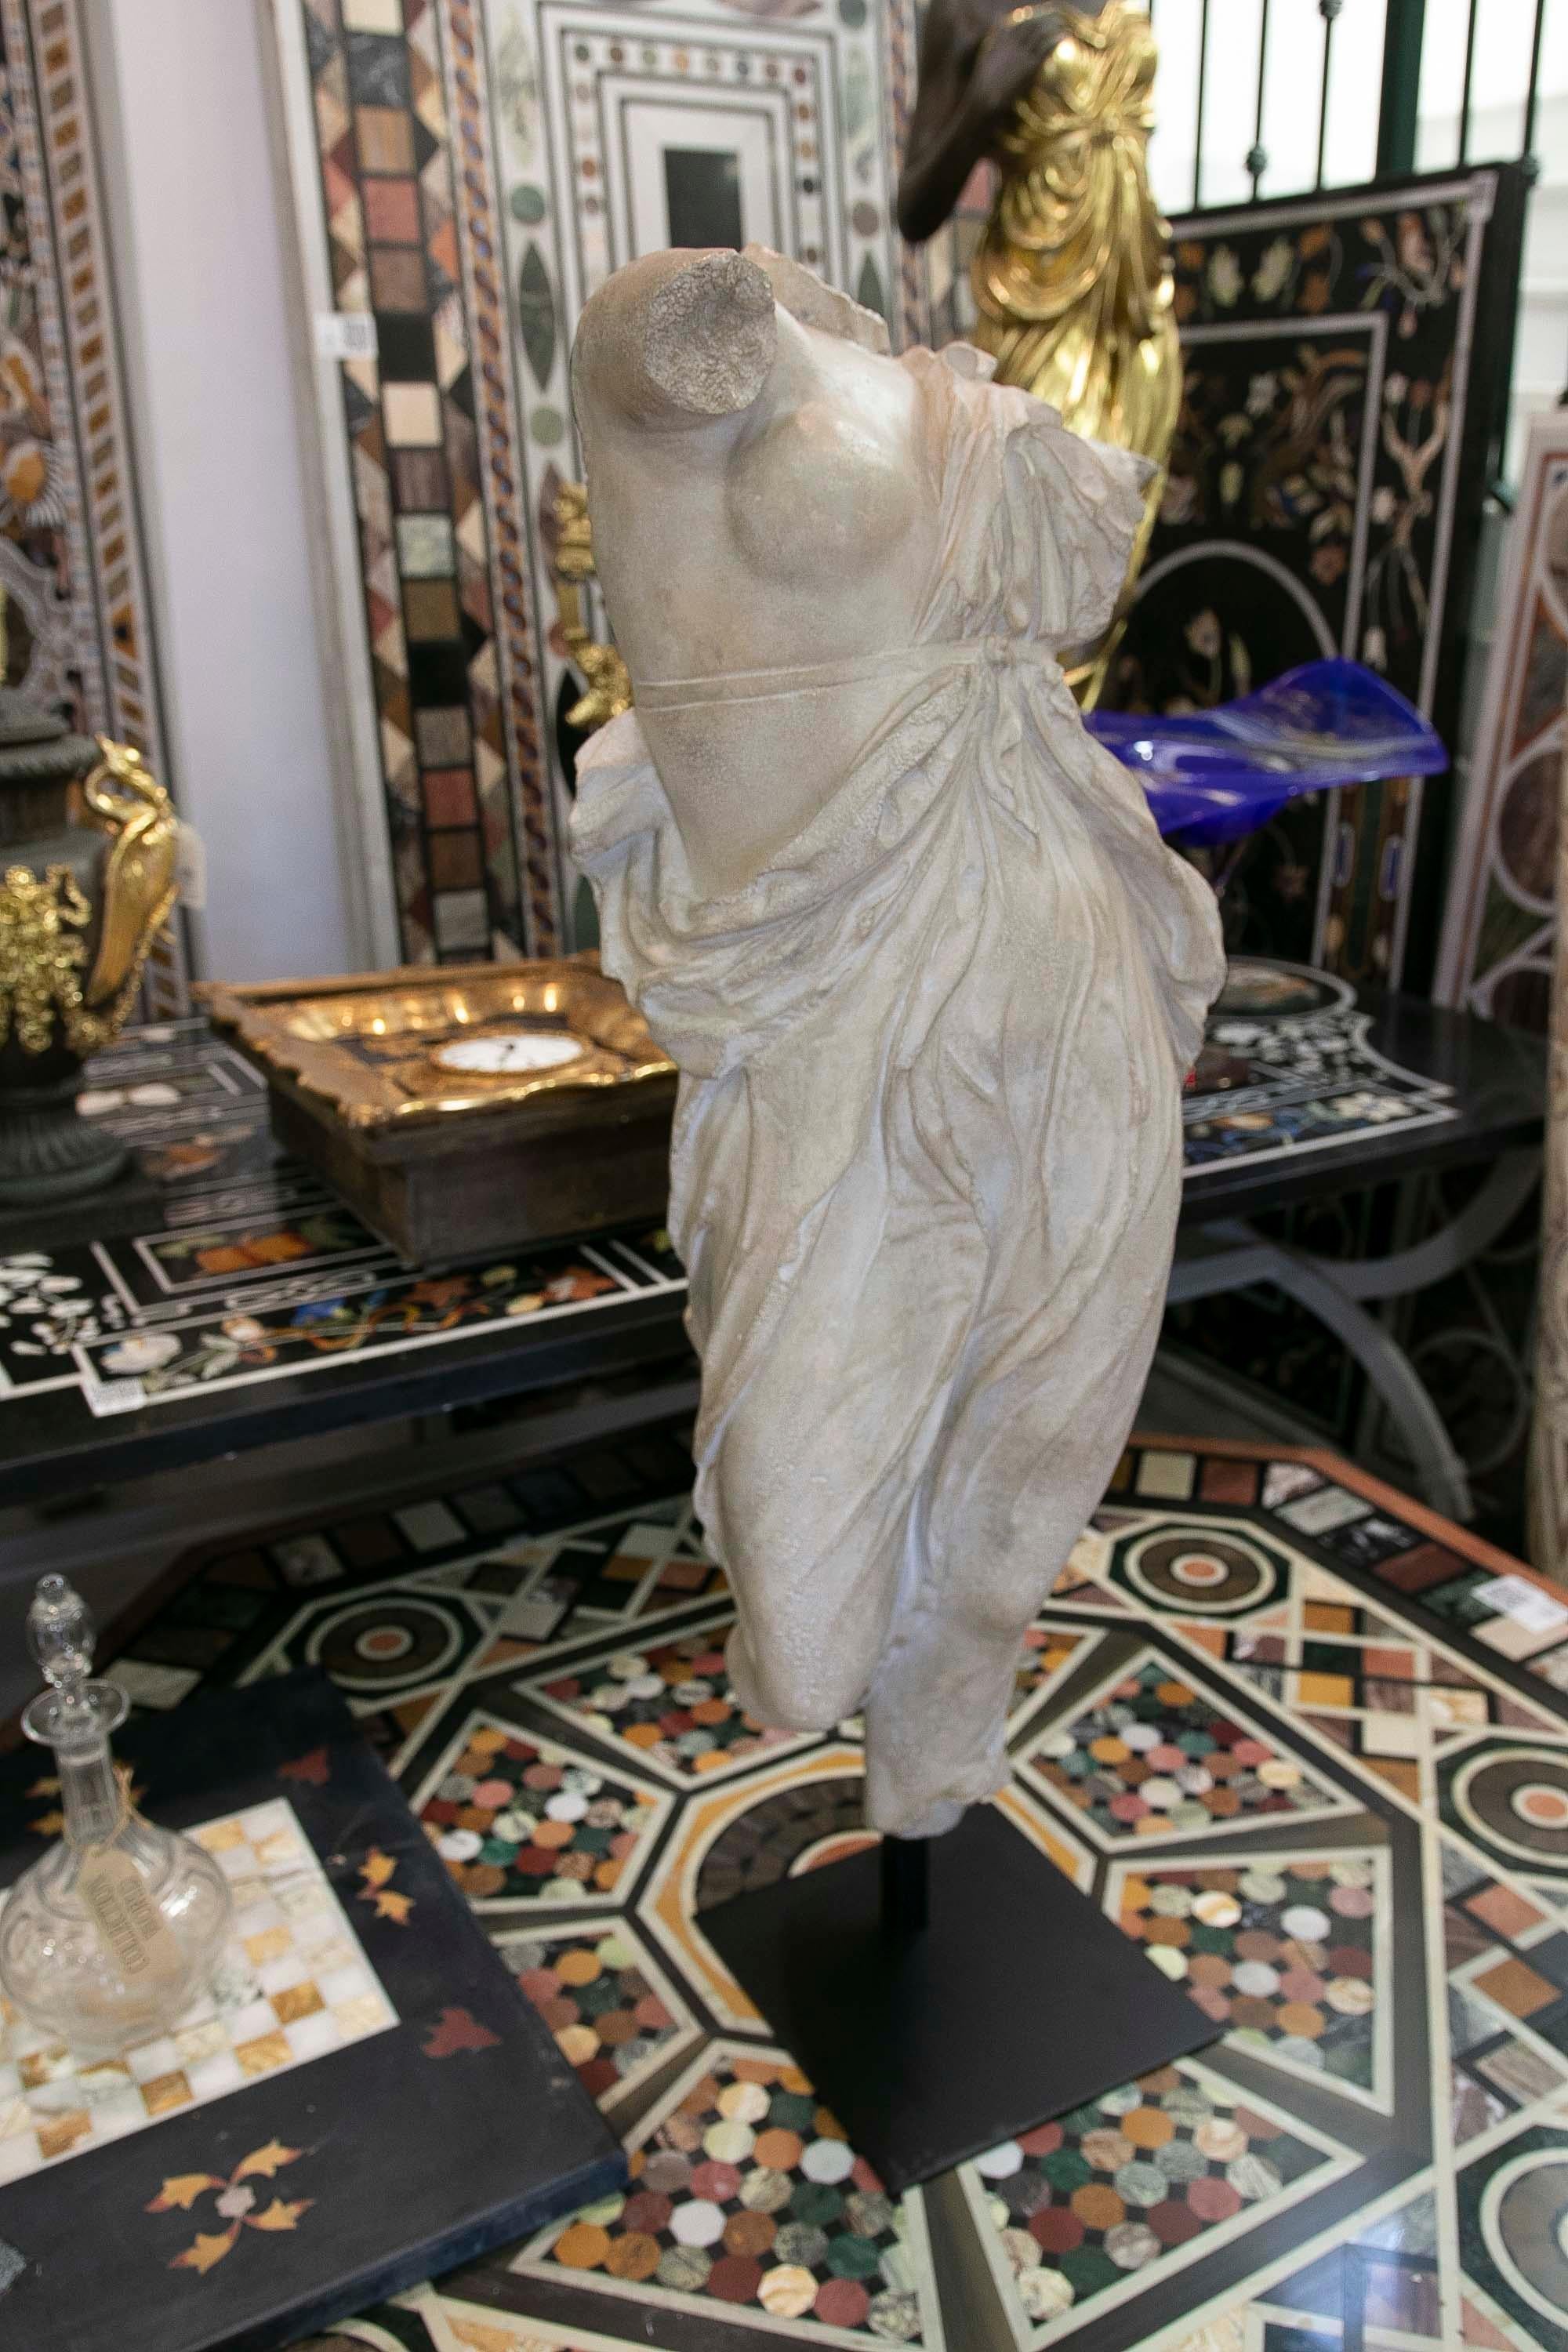 Classical Roman female dancing torso sculpture in resin imitating marble on an iron pedestal. Top quality antique imitation of the erosion and passing of time.